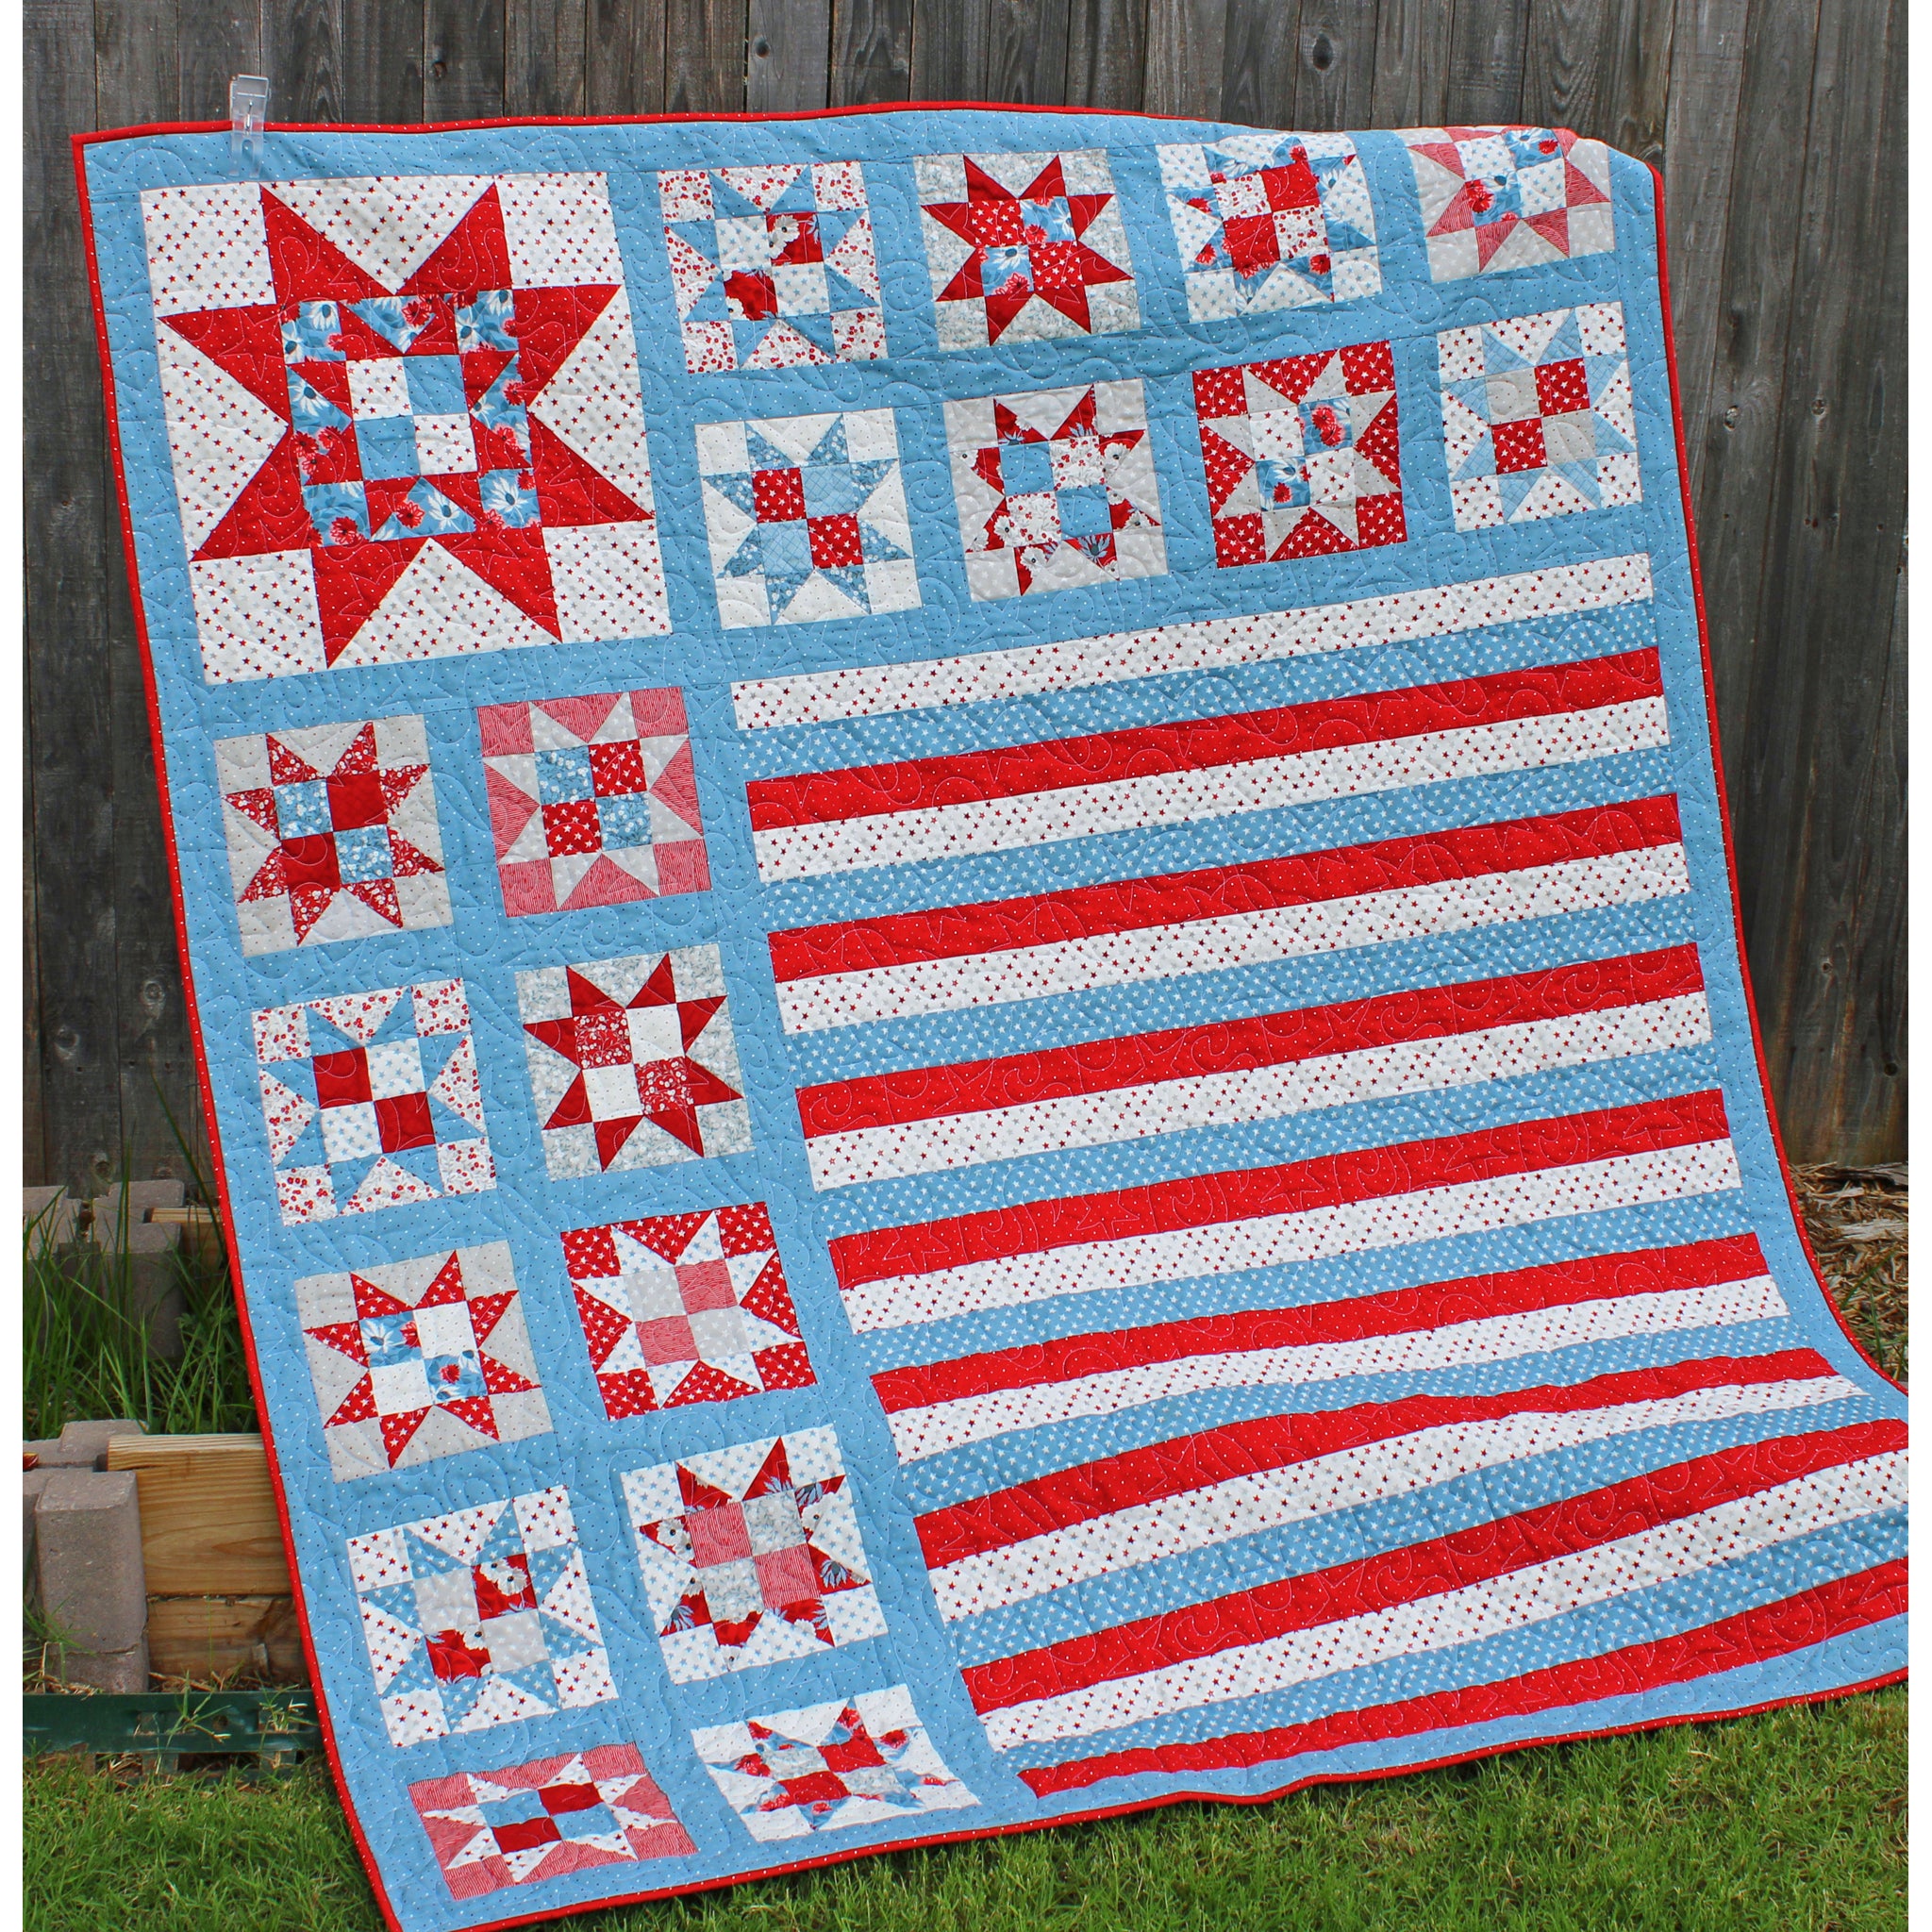 A patriotic quilt showcasing red, white, and blue ohio stars along side red, white and blue stripes. Perfect Americana quilt without being an actual flag.